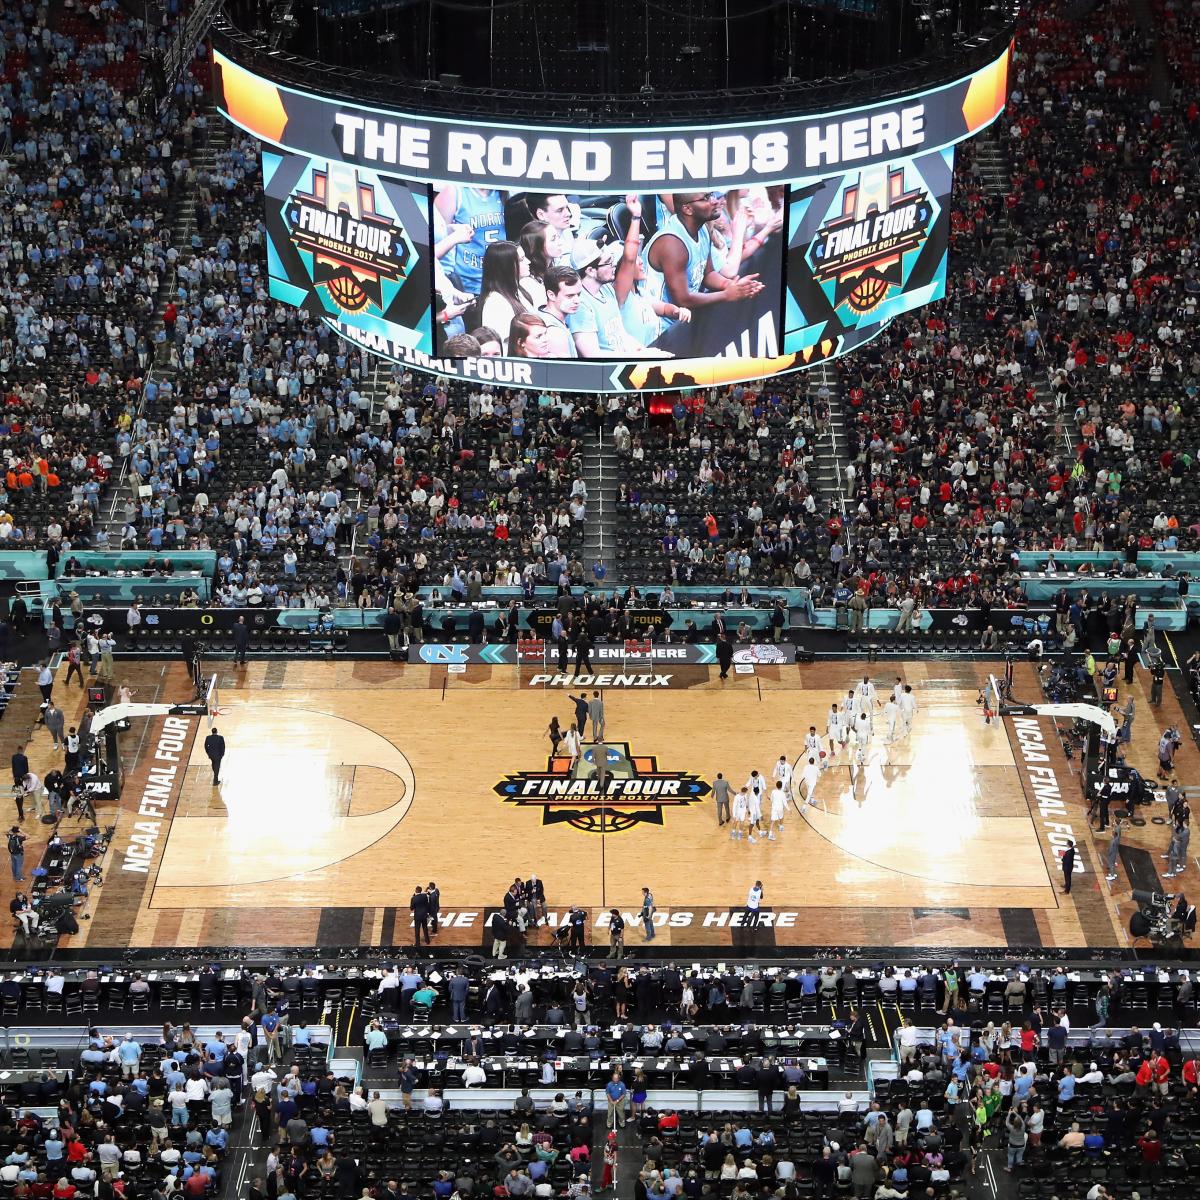 Final Four Weekend Will Feature 3on3 Tournament for College Seniors